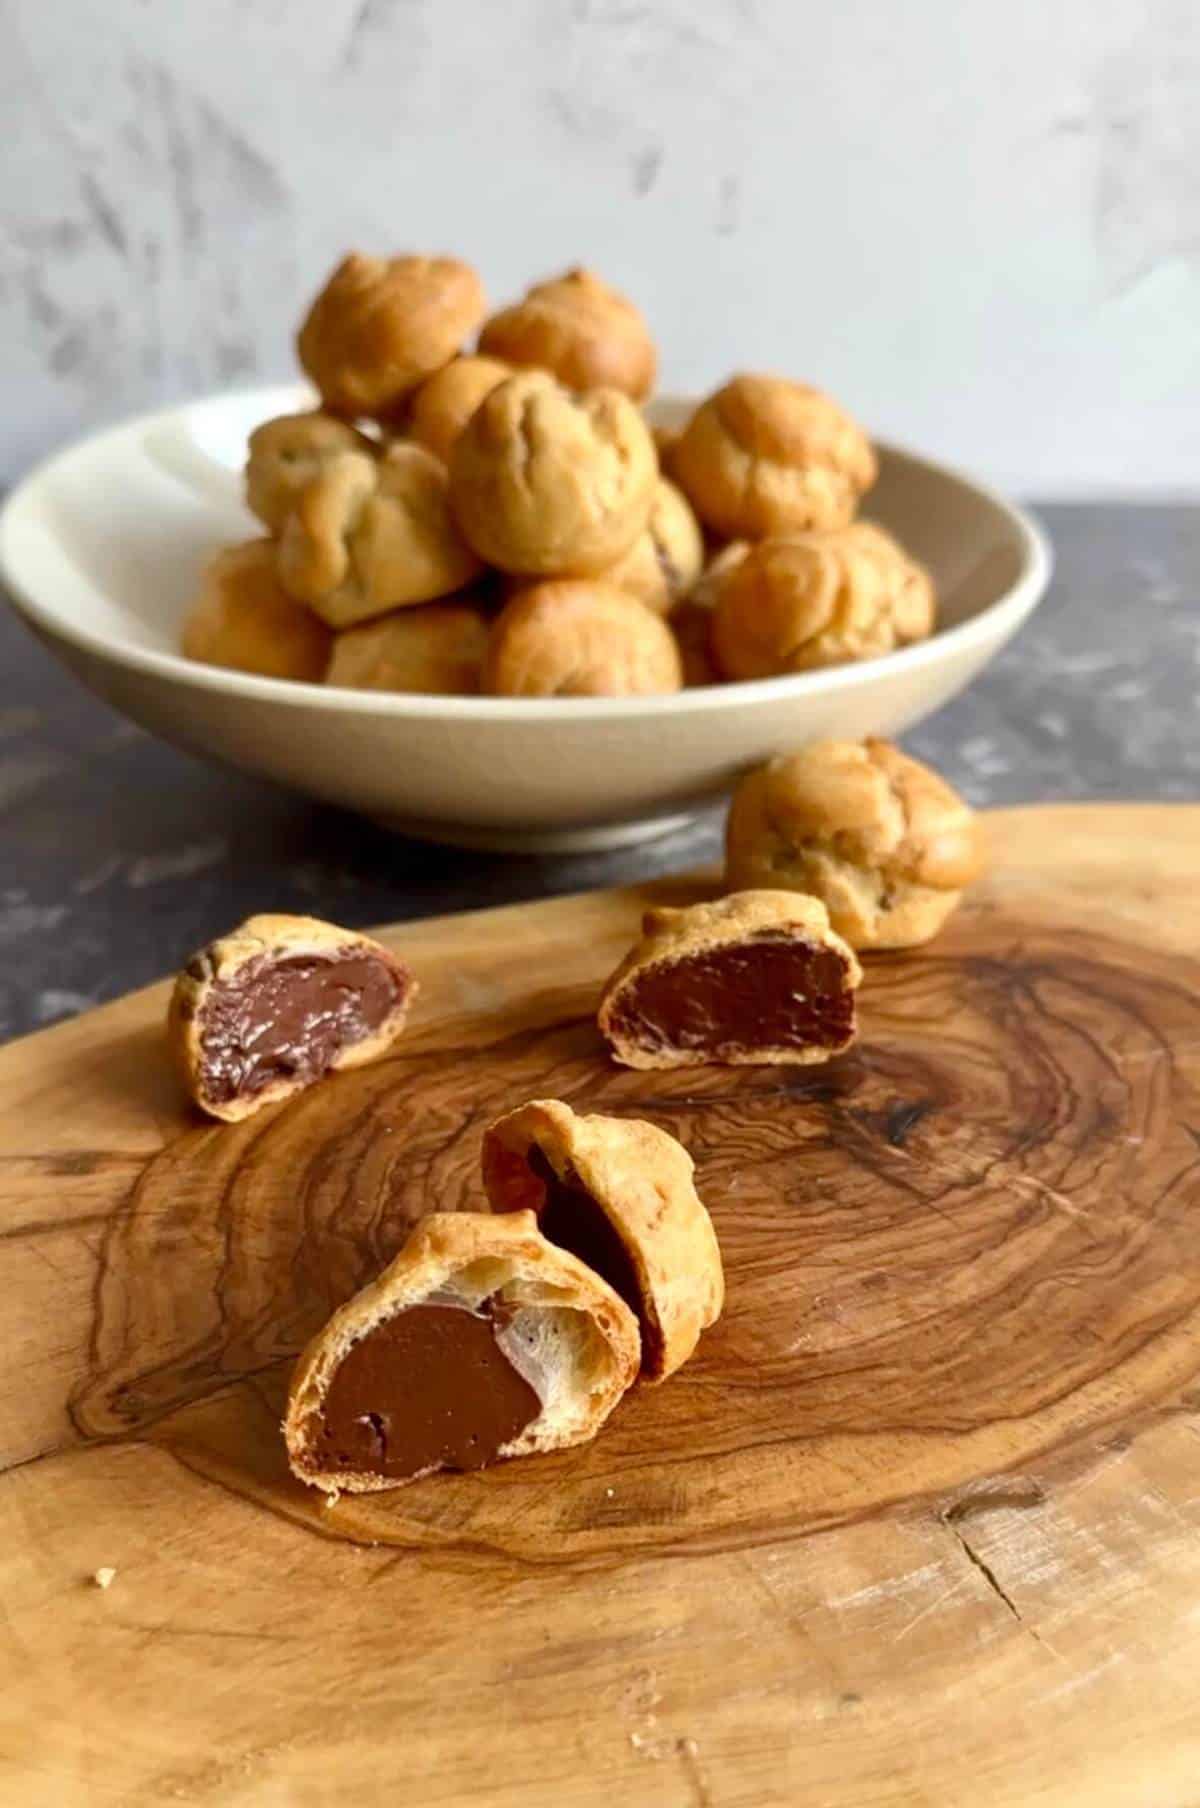 Chocolate classic profiteroles on a wooden chopping board cut in half to show their filling.